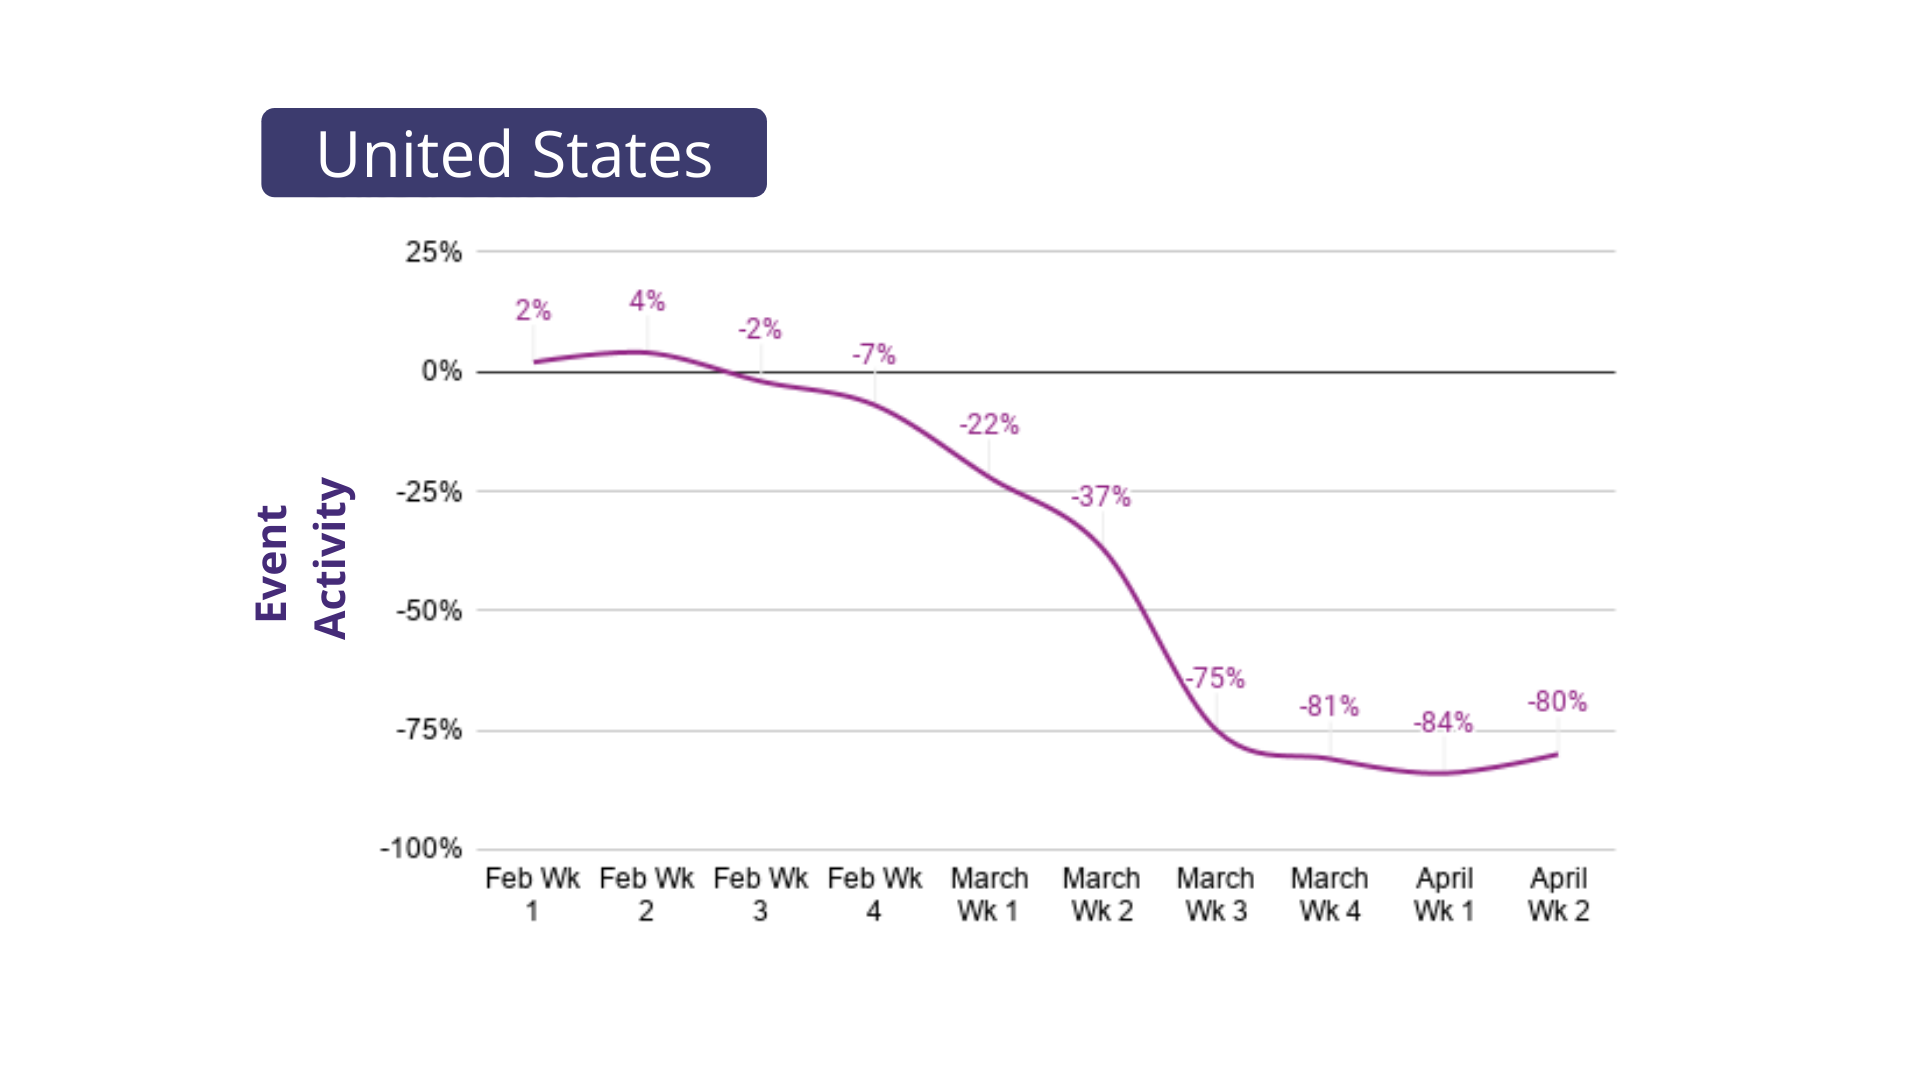 Graph showing decrease in event activity in the united states from February to April 2020